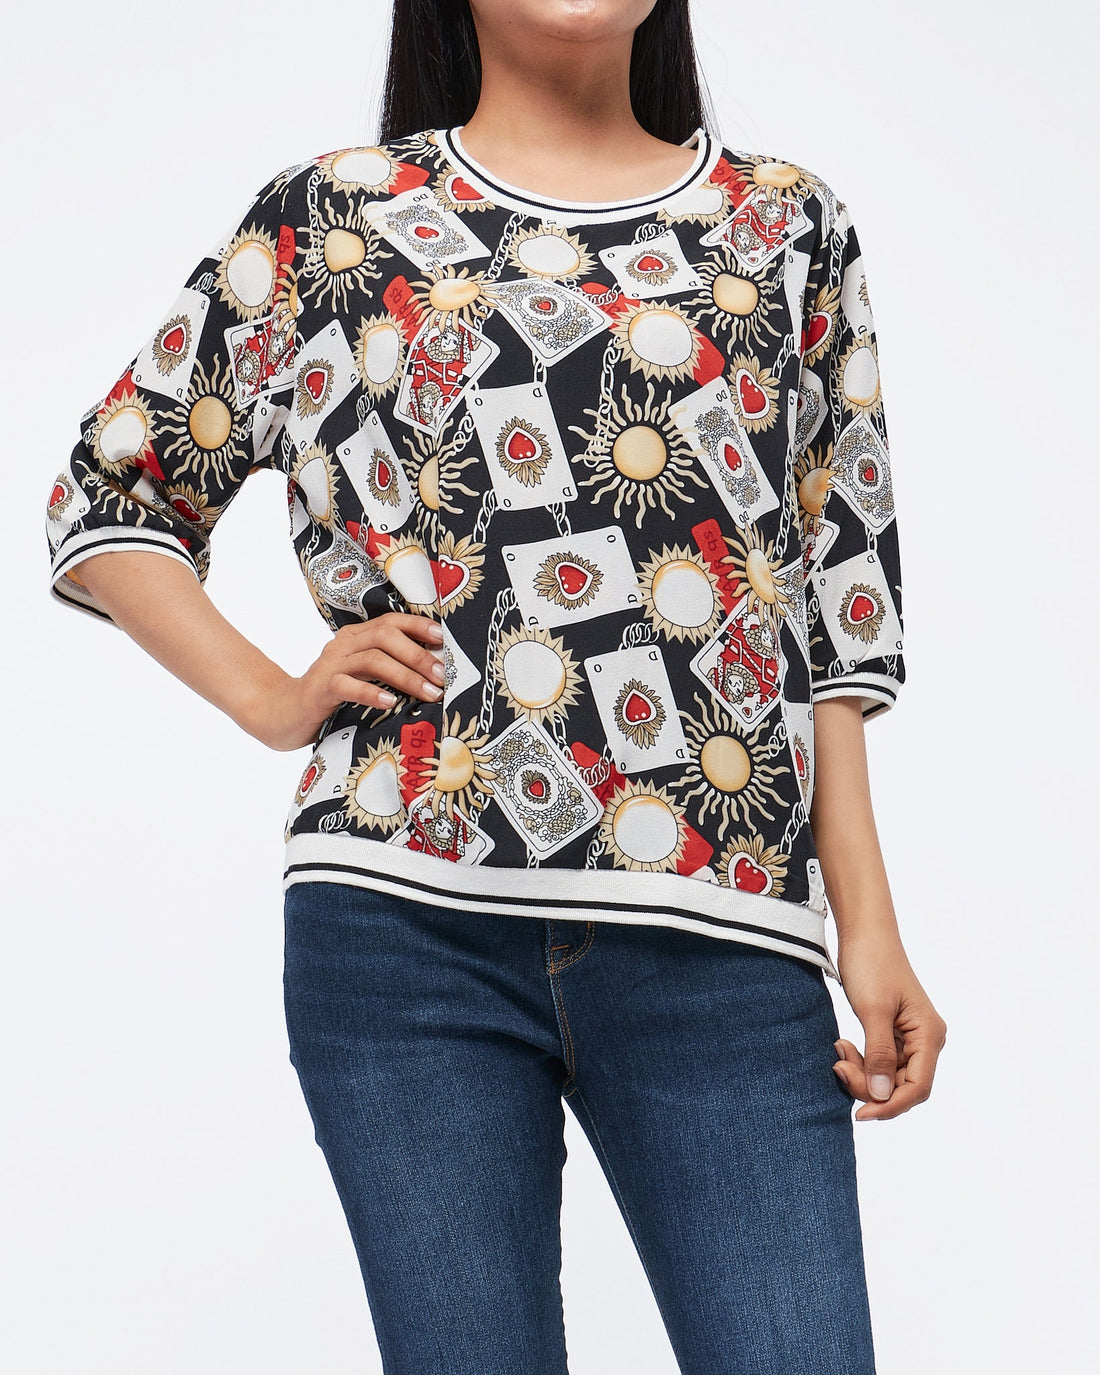 Women's Shirts & Tops - MOI OUTFIT